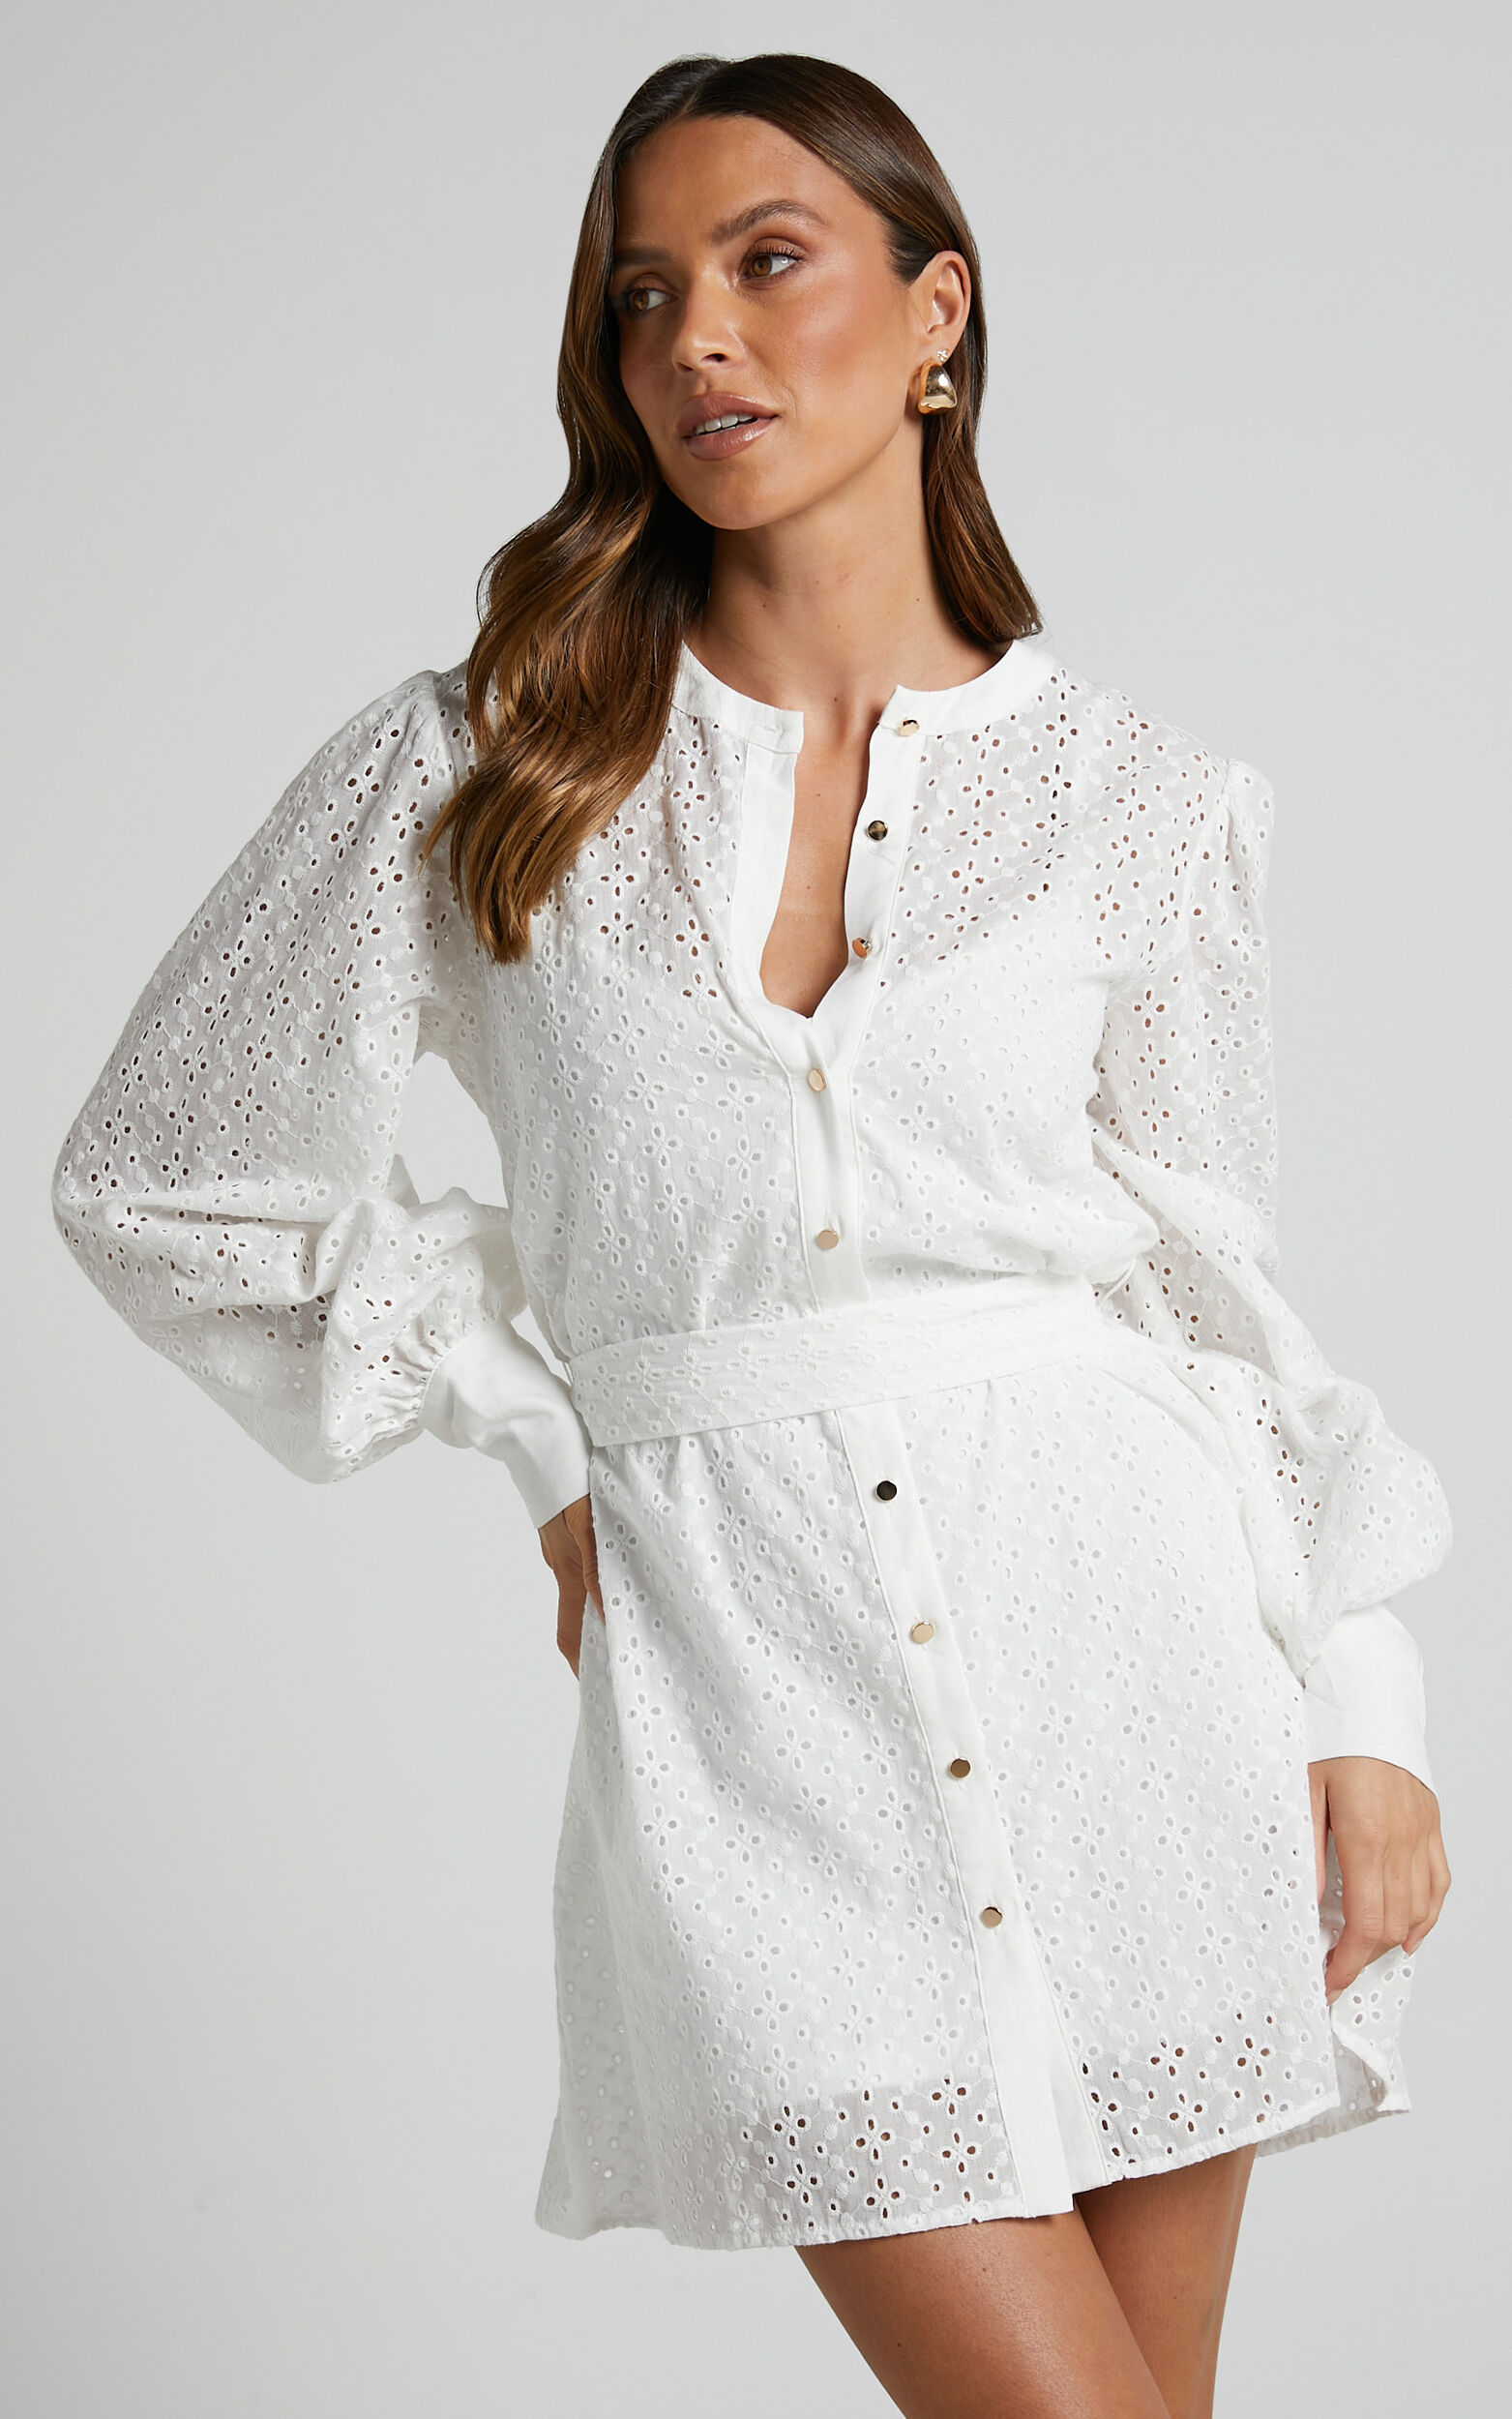 Broderie Anglaise Cropped Cardigan - Ready to Wear